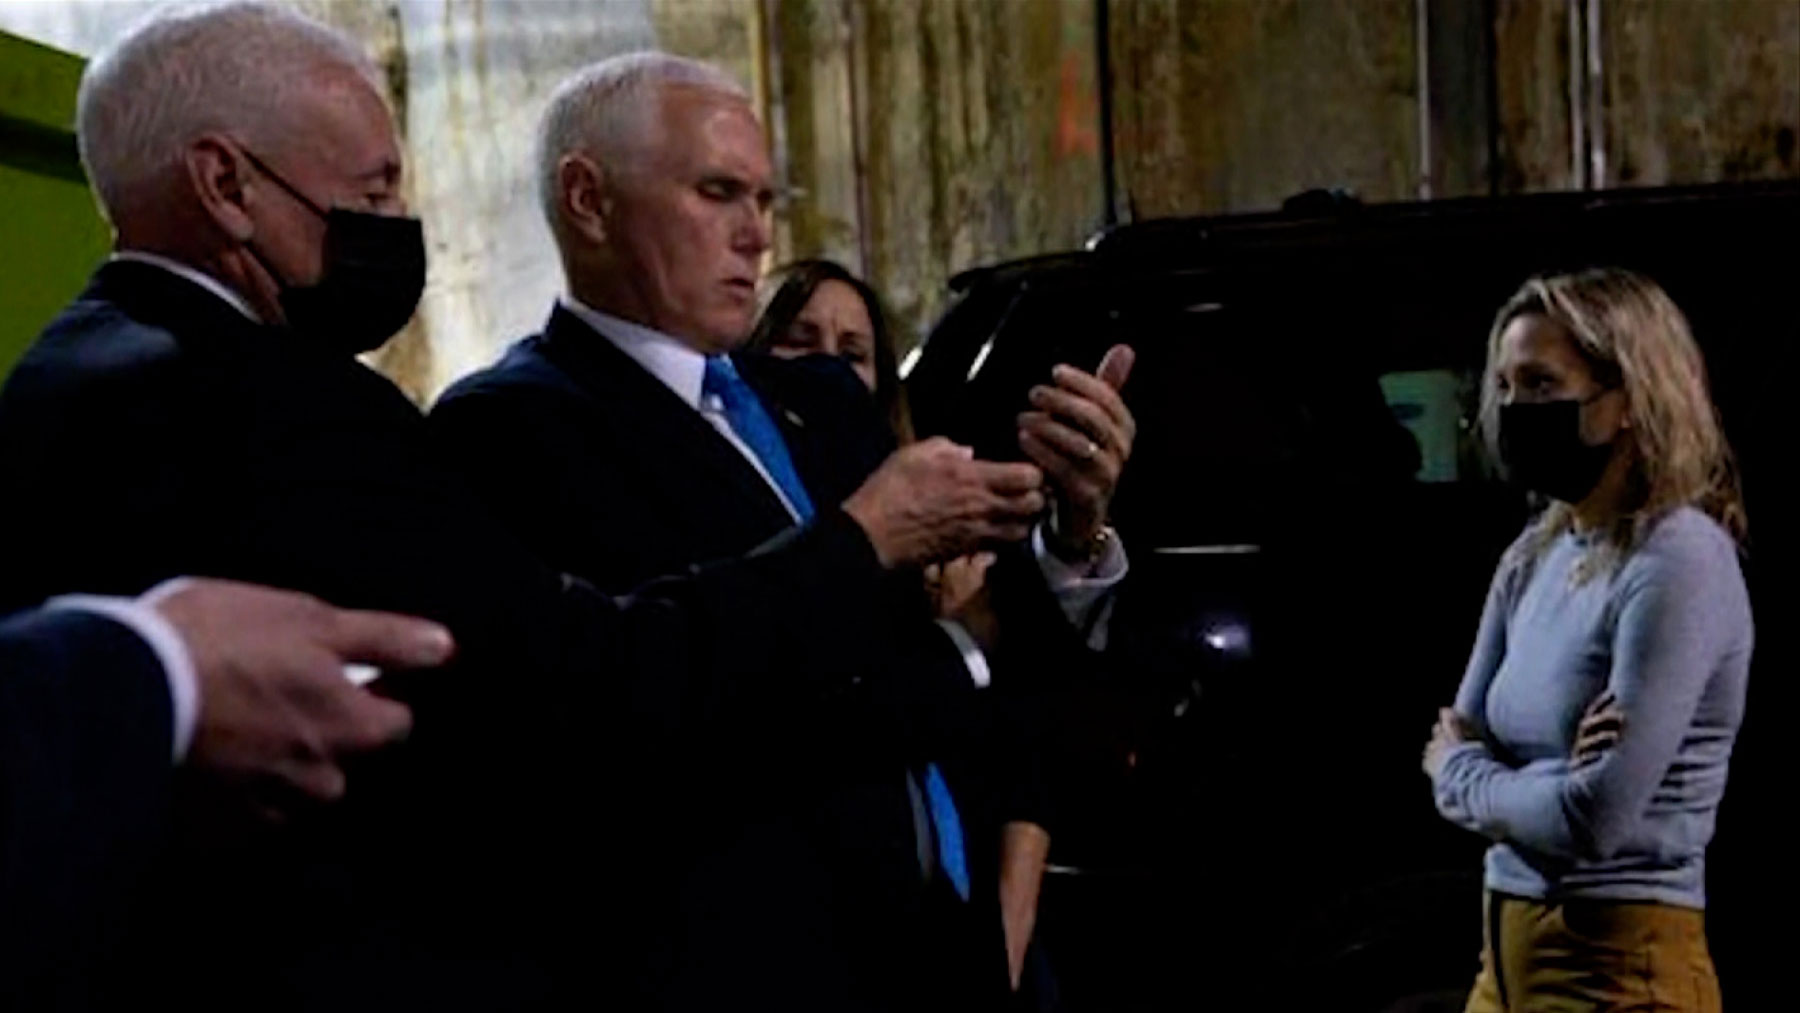 Trump sent tweet attacking Pence after learning of violence at the Capitol, committee says